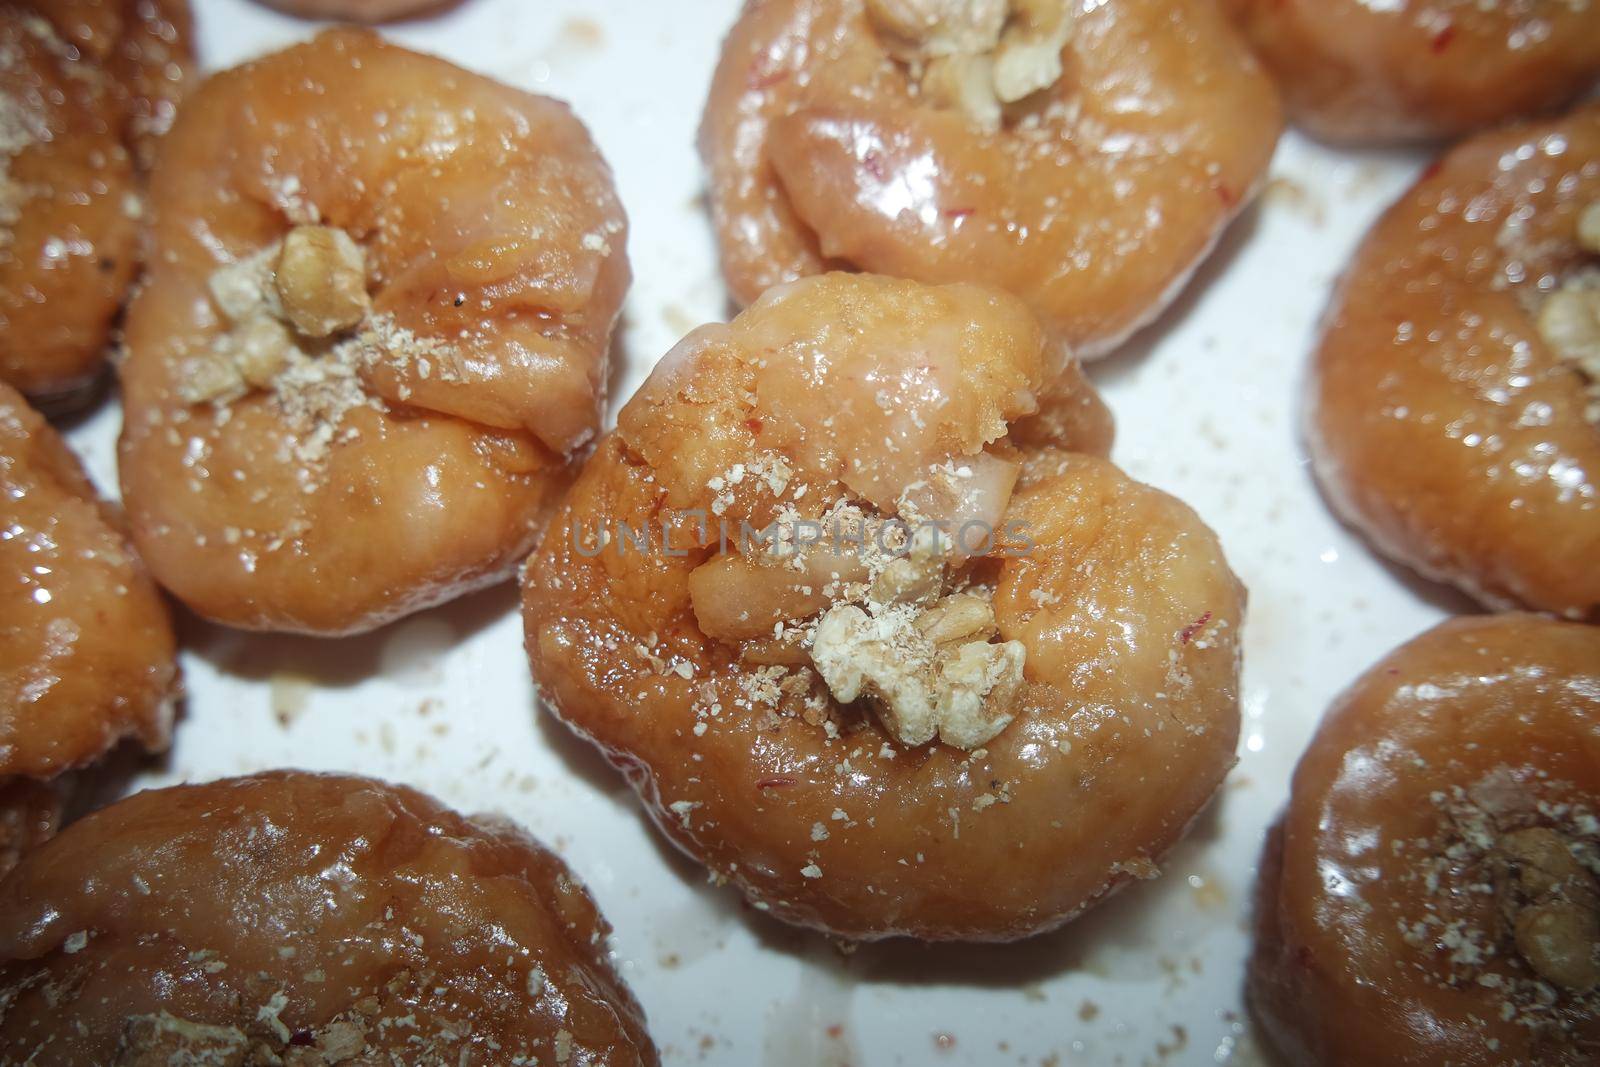 Delicious and tasty Asian sweet dish called balu shahi or baloshahi or balushahi. This dish is street sweet found in Pakistan India and Bangladesh and served in the festivities.